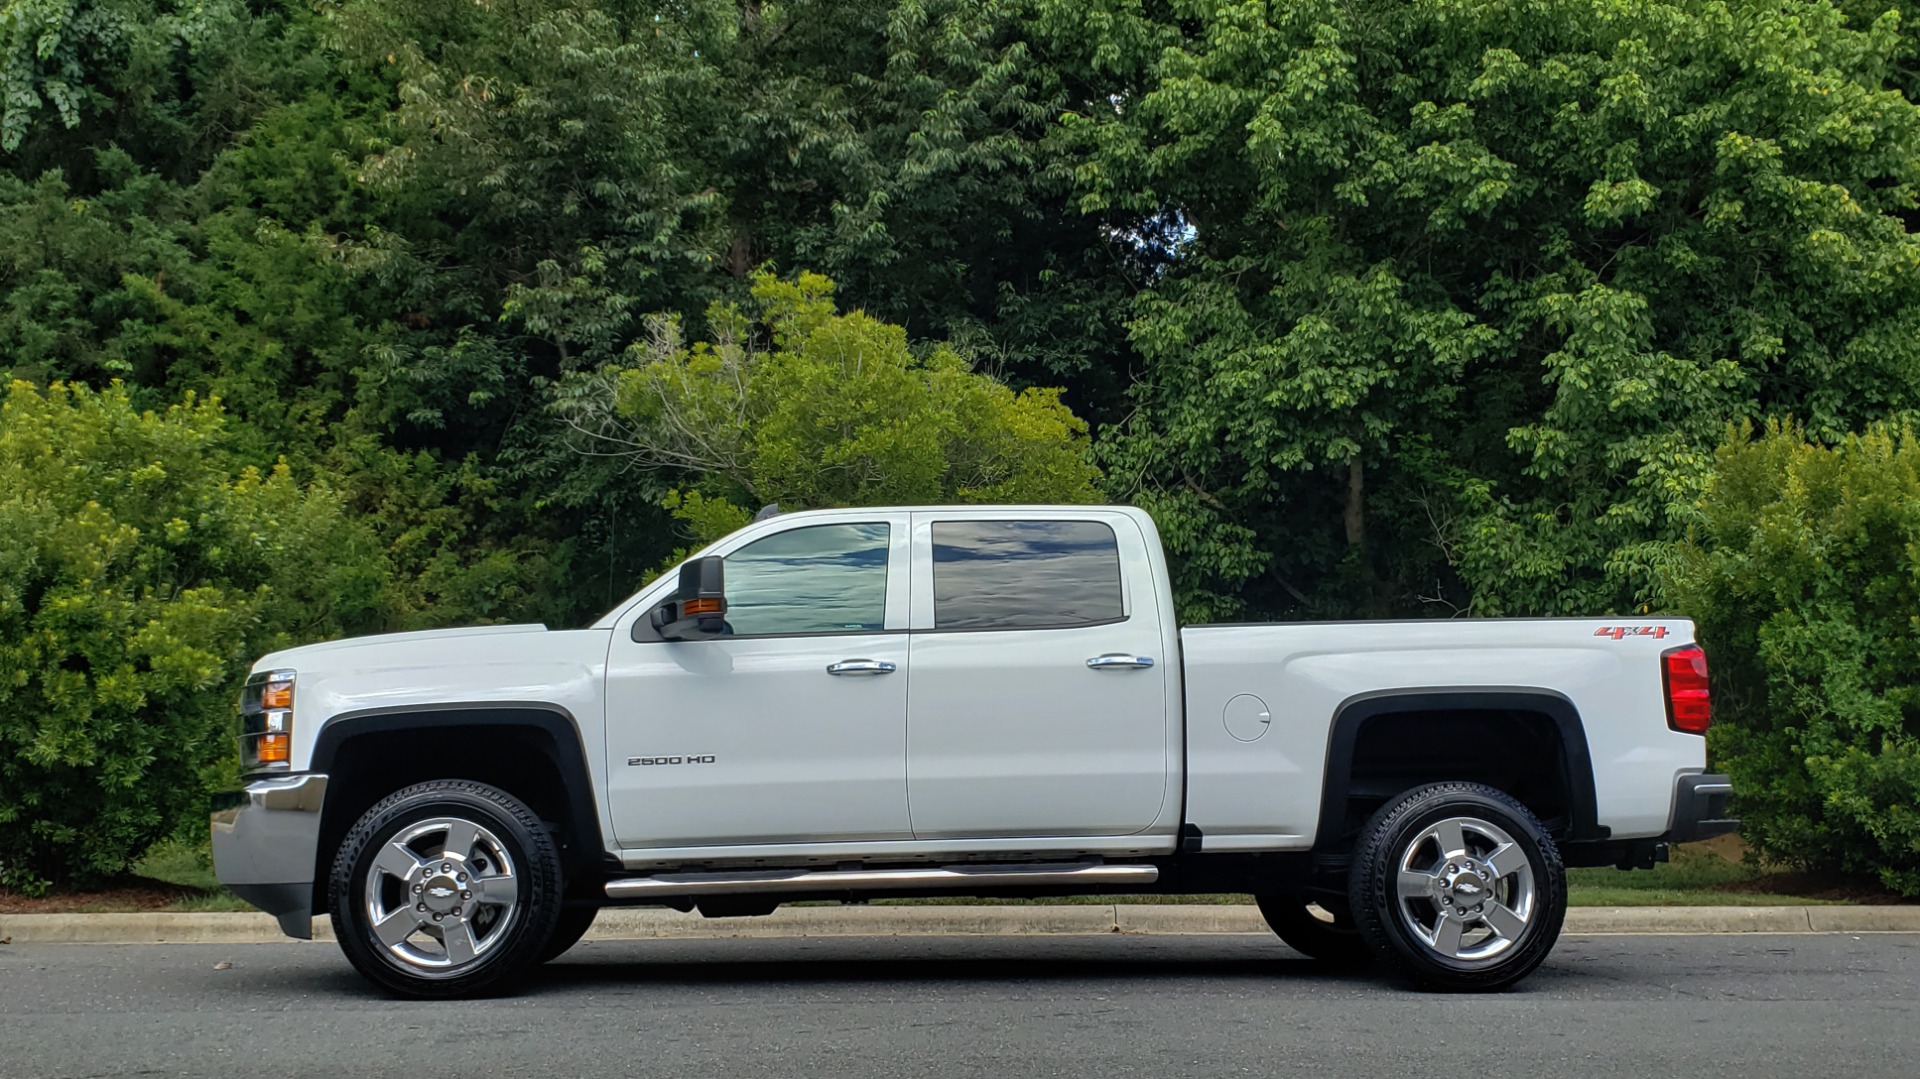 Used 2019 Chevrolet SILVERADO 2500HD WORK TRUCK / CREW CAB / 6.0L V8 / 4WD / BEDLINER for sale Sold at Formula Imports in Charlotte NC 28227 2